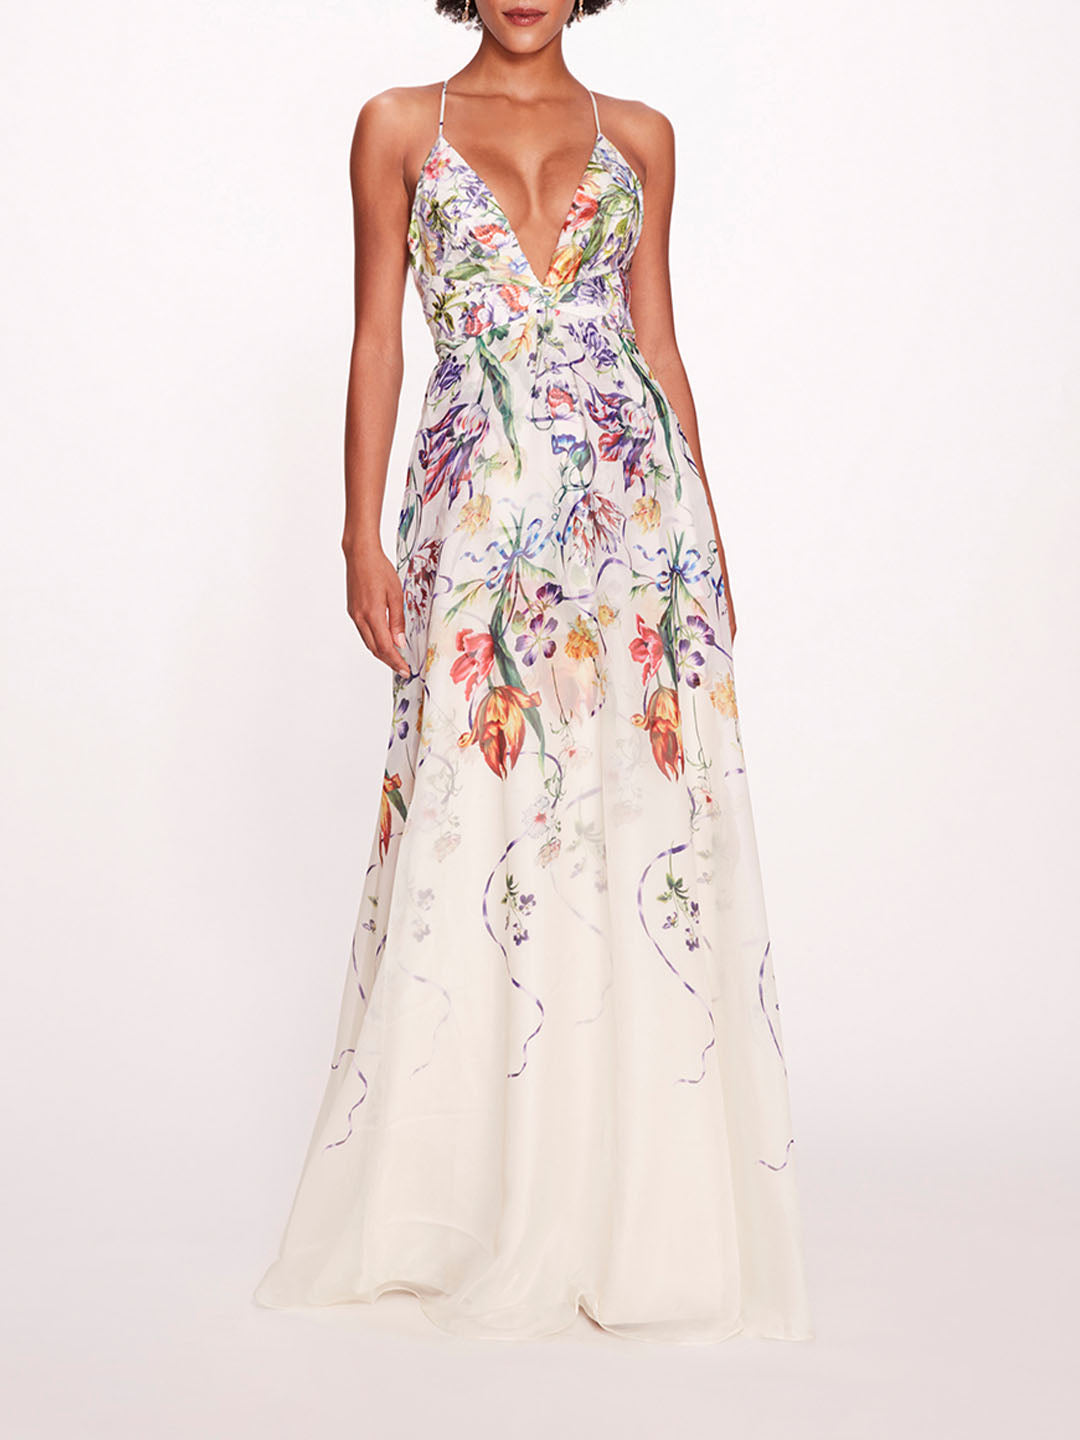 Ribbons Gown | Marchesa